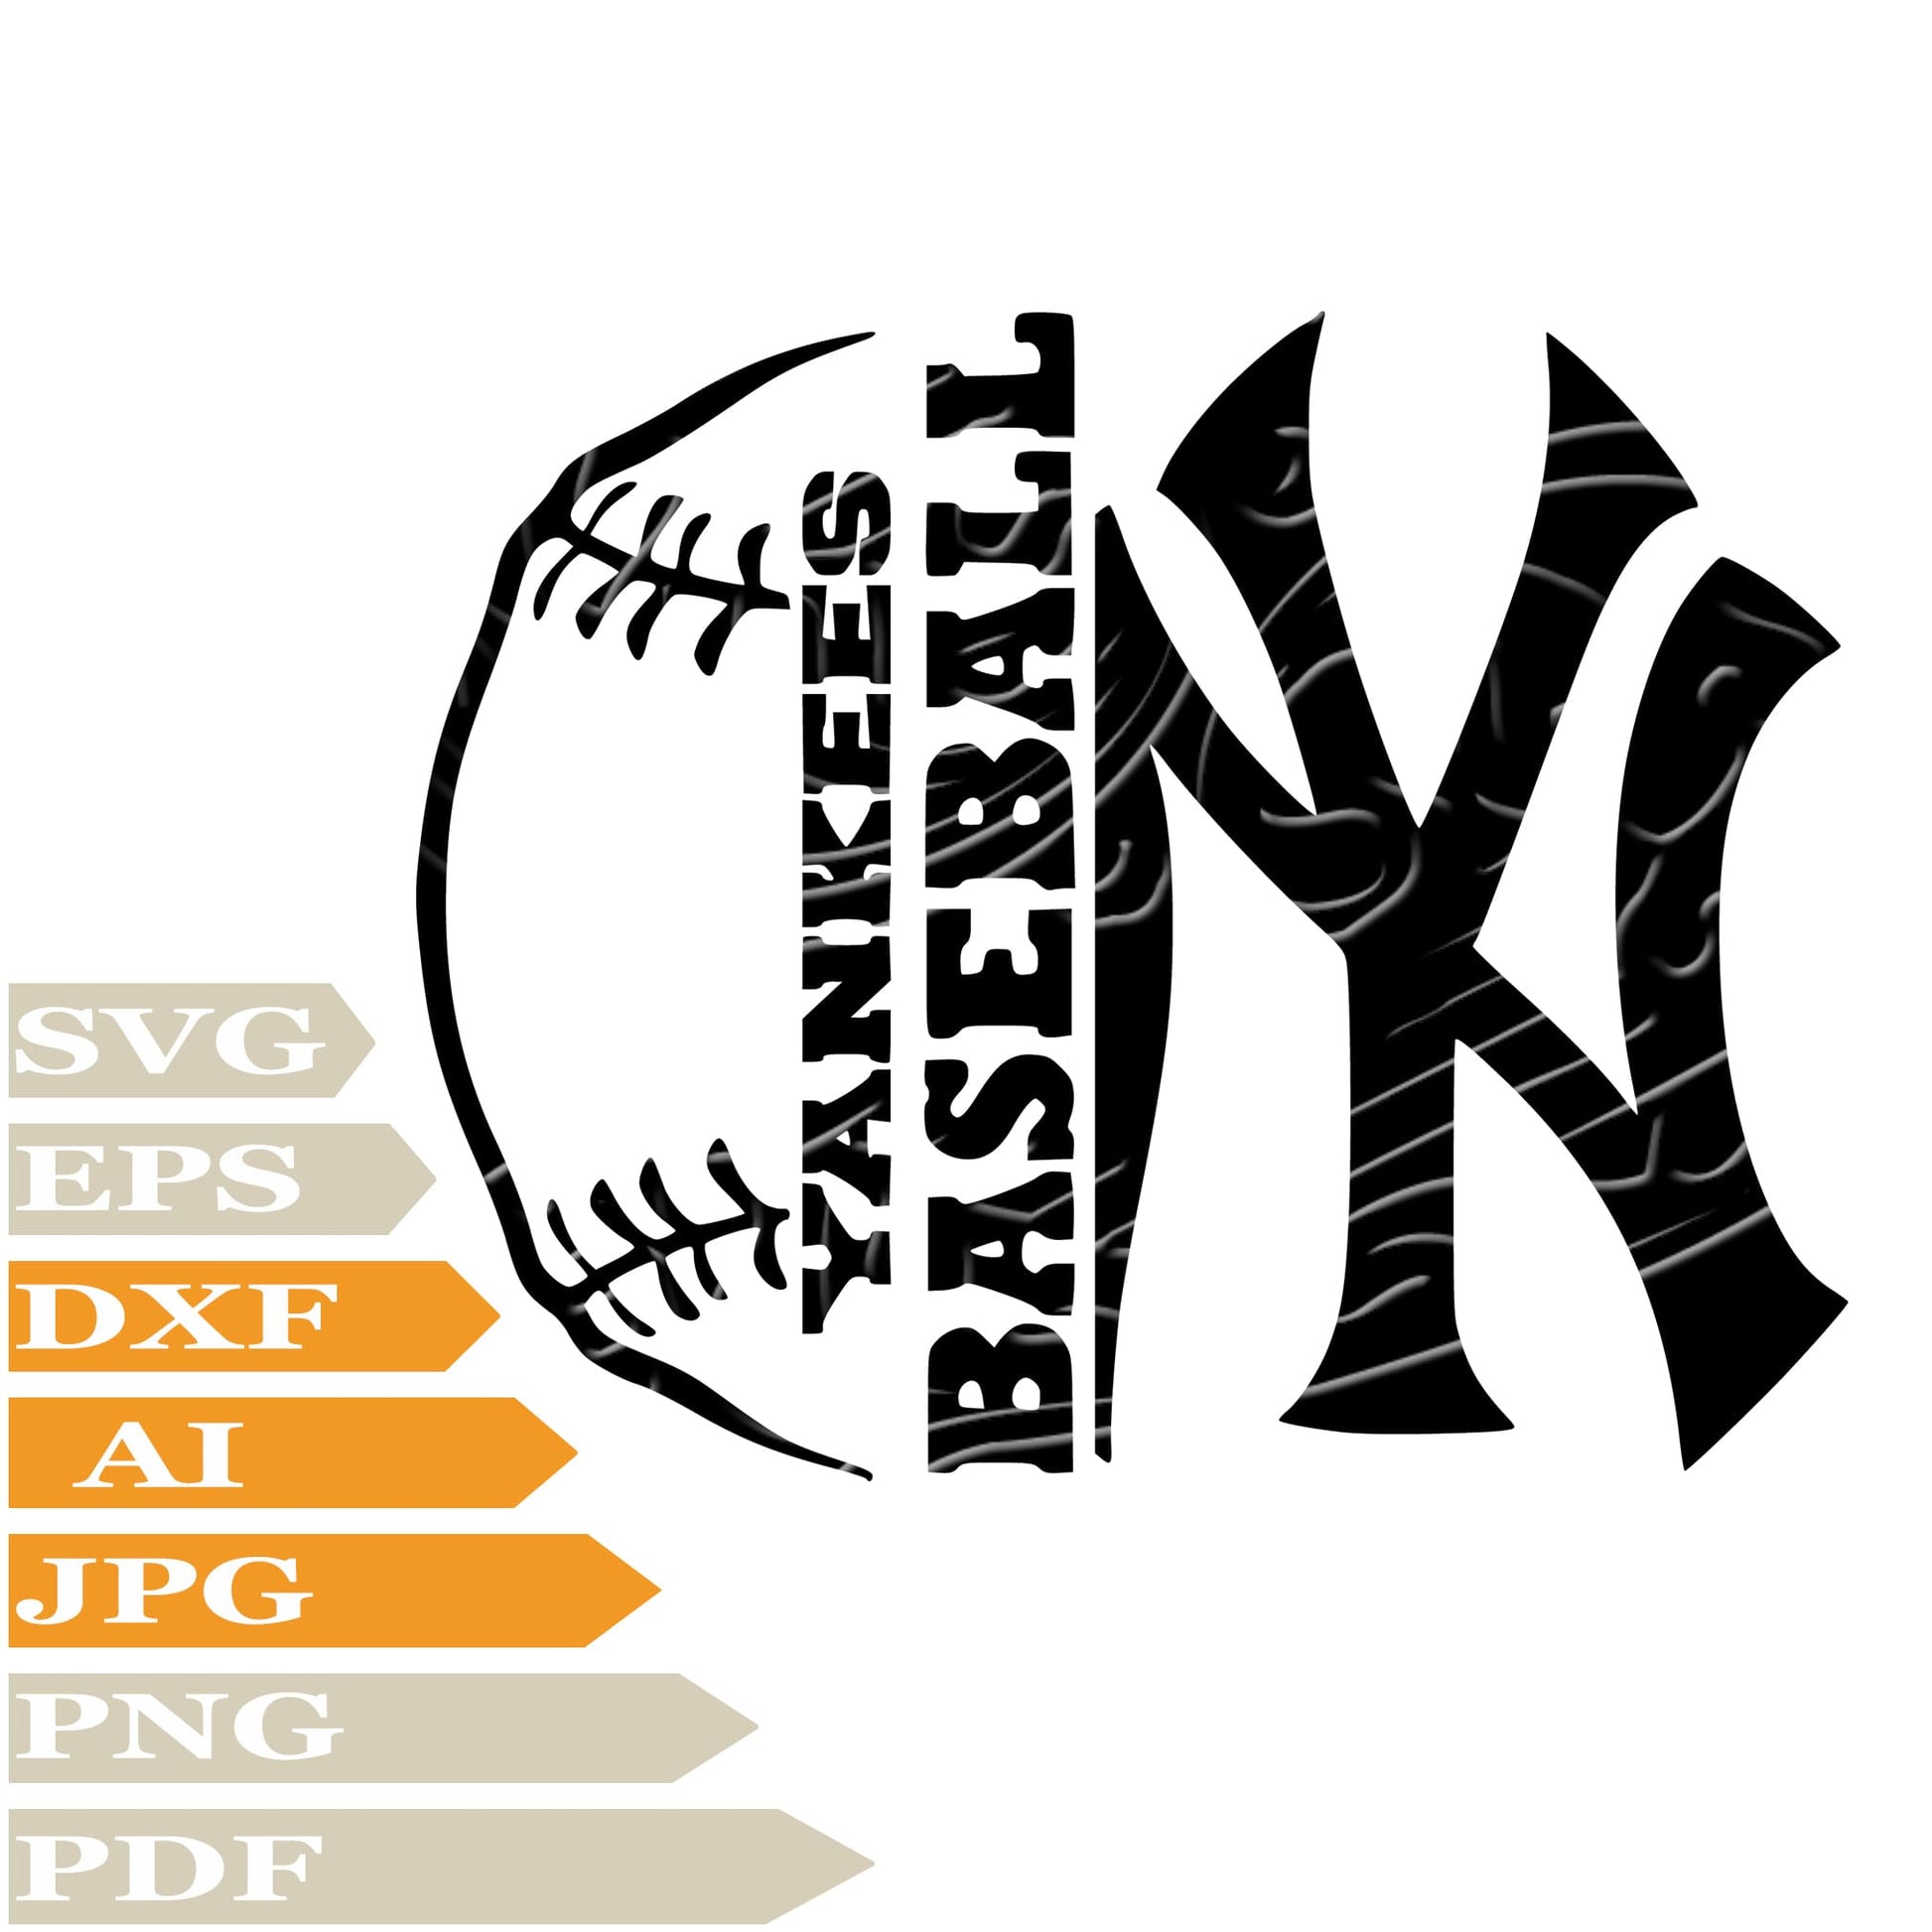 New York Yankees Baseball, New York Yankee Logo , Svg File, Image Cut, Png, For Tattoo, Silhouette, Digital Vector Download, Cut File, Clipart, For Cricut